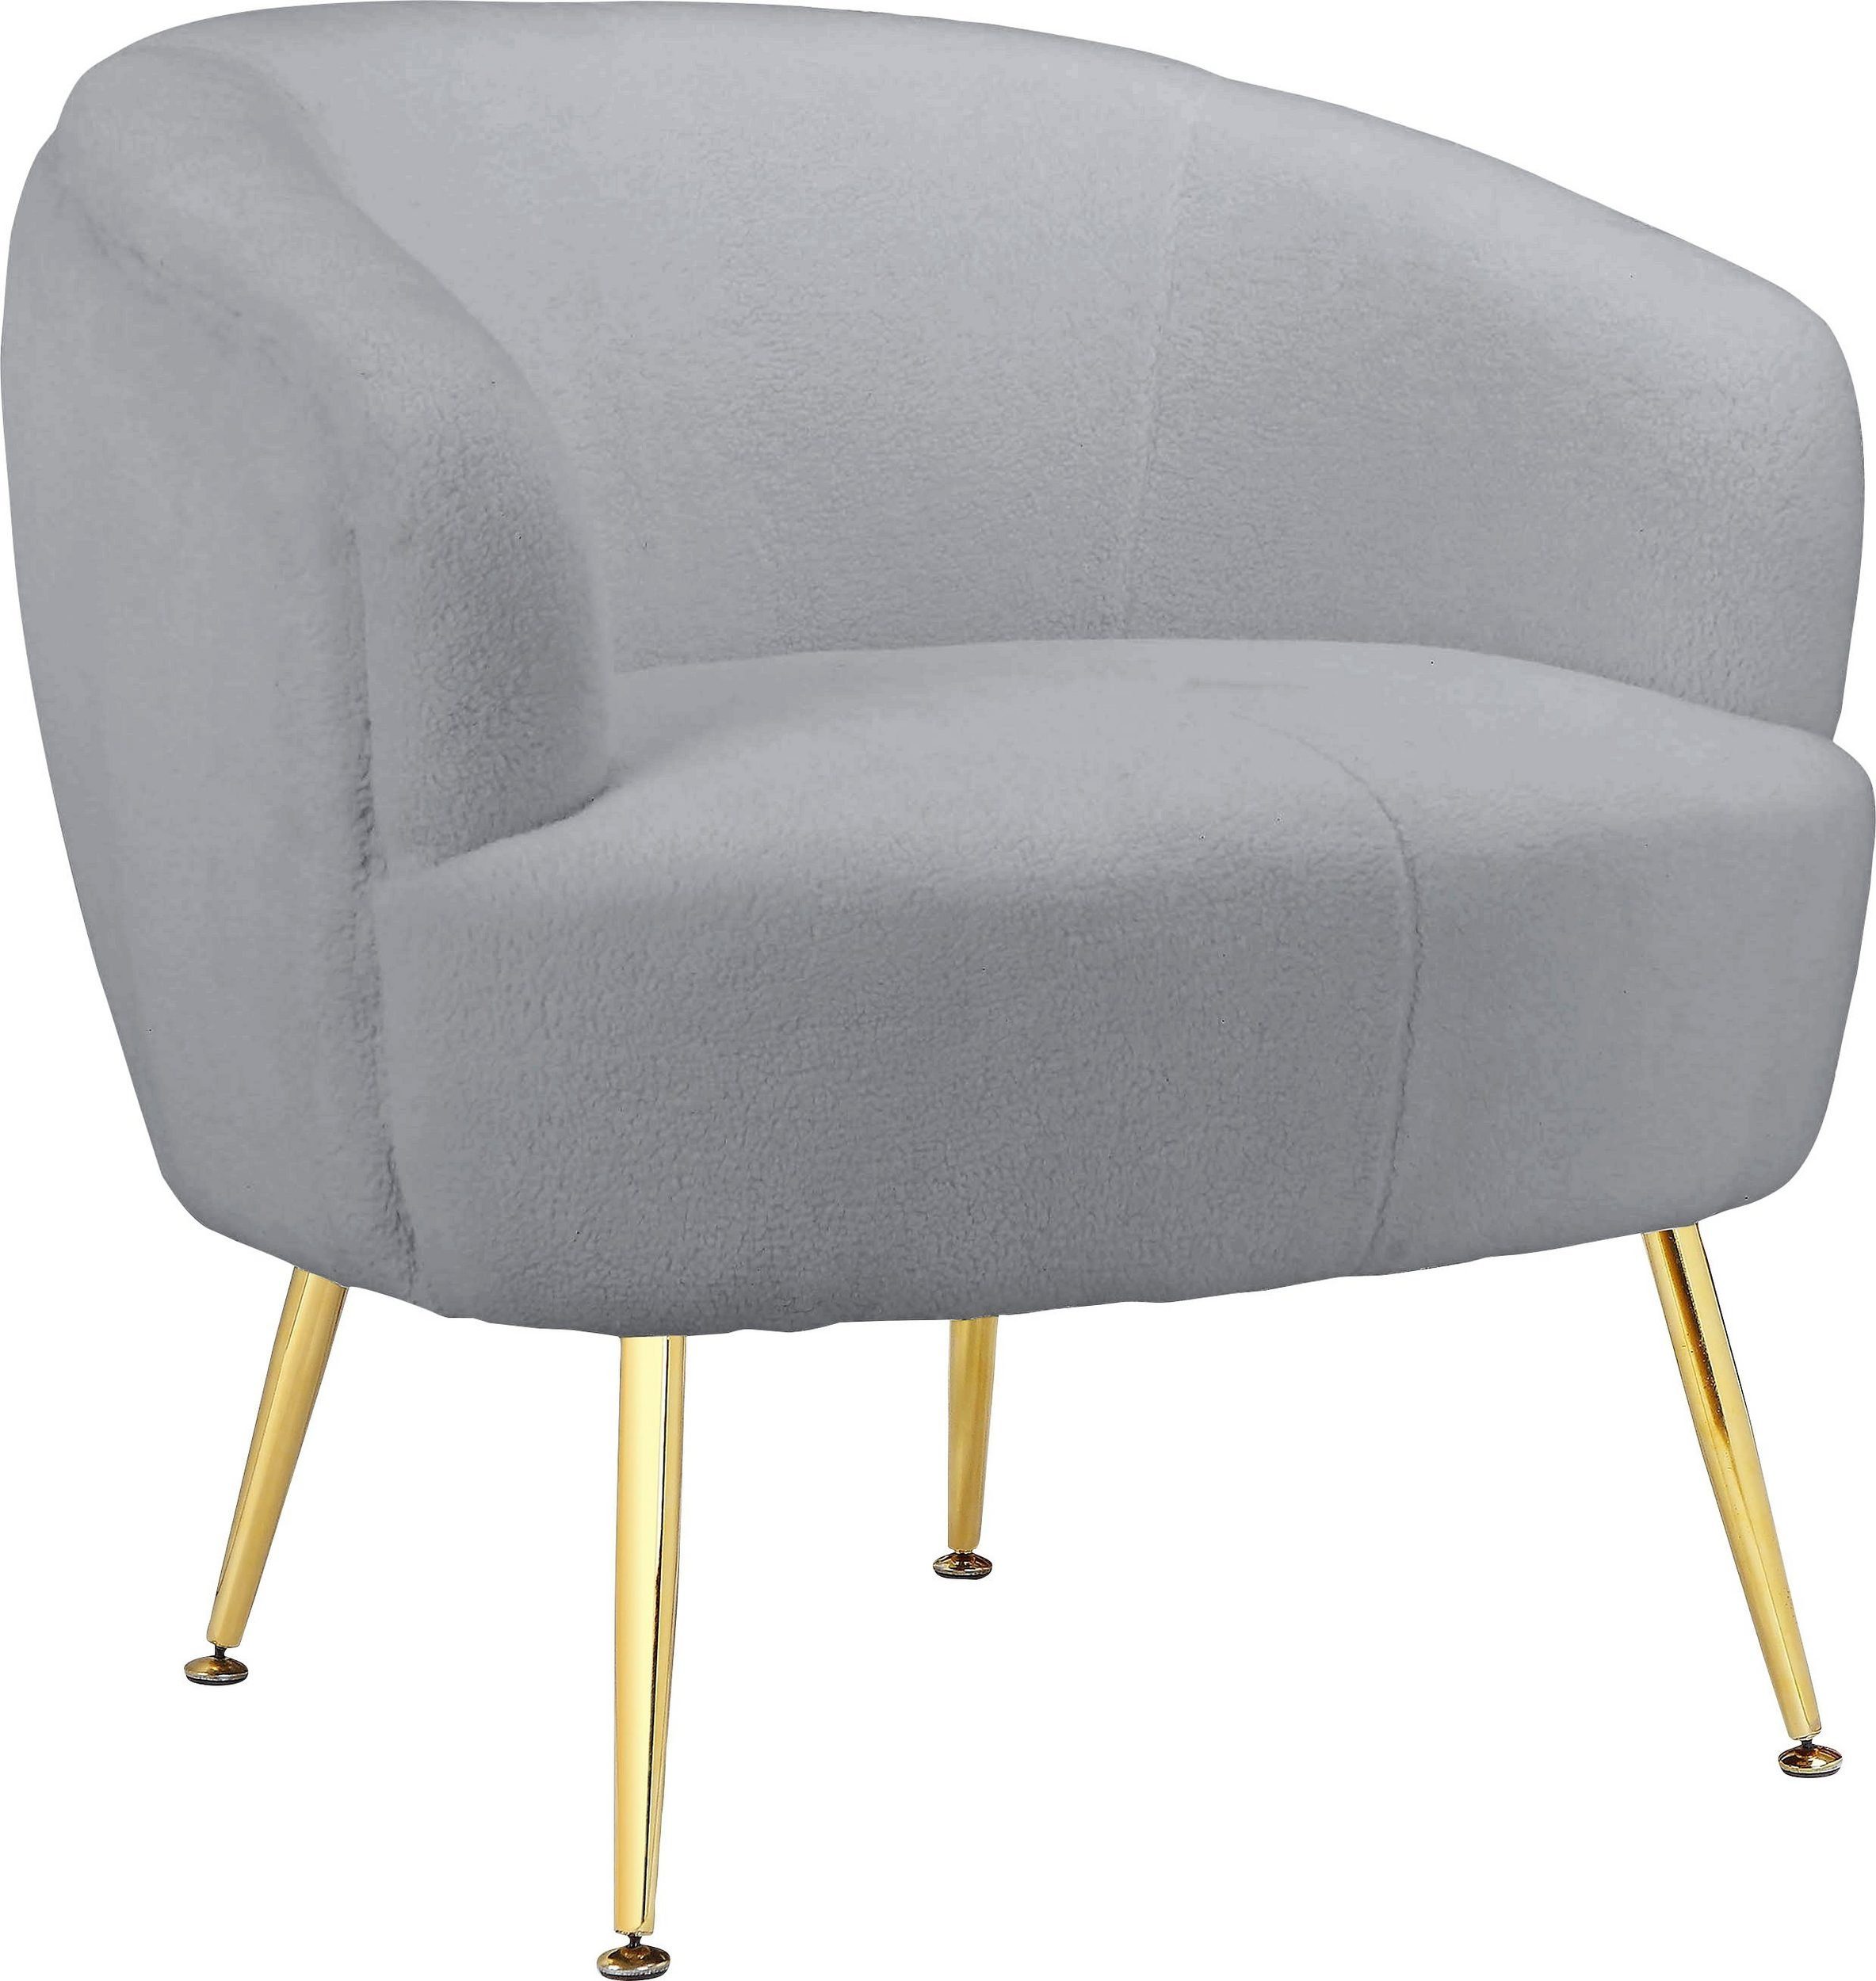 Loungesessel gold loft24 with Upholstered color Scavo, armchair